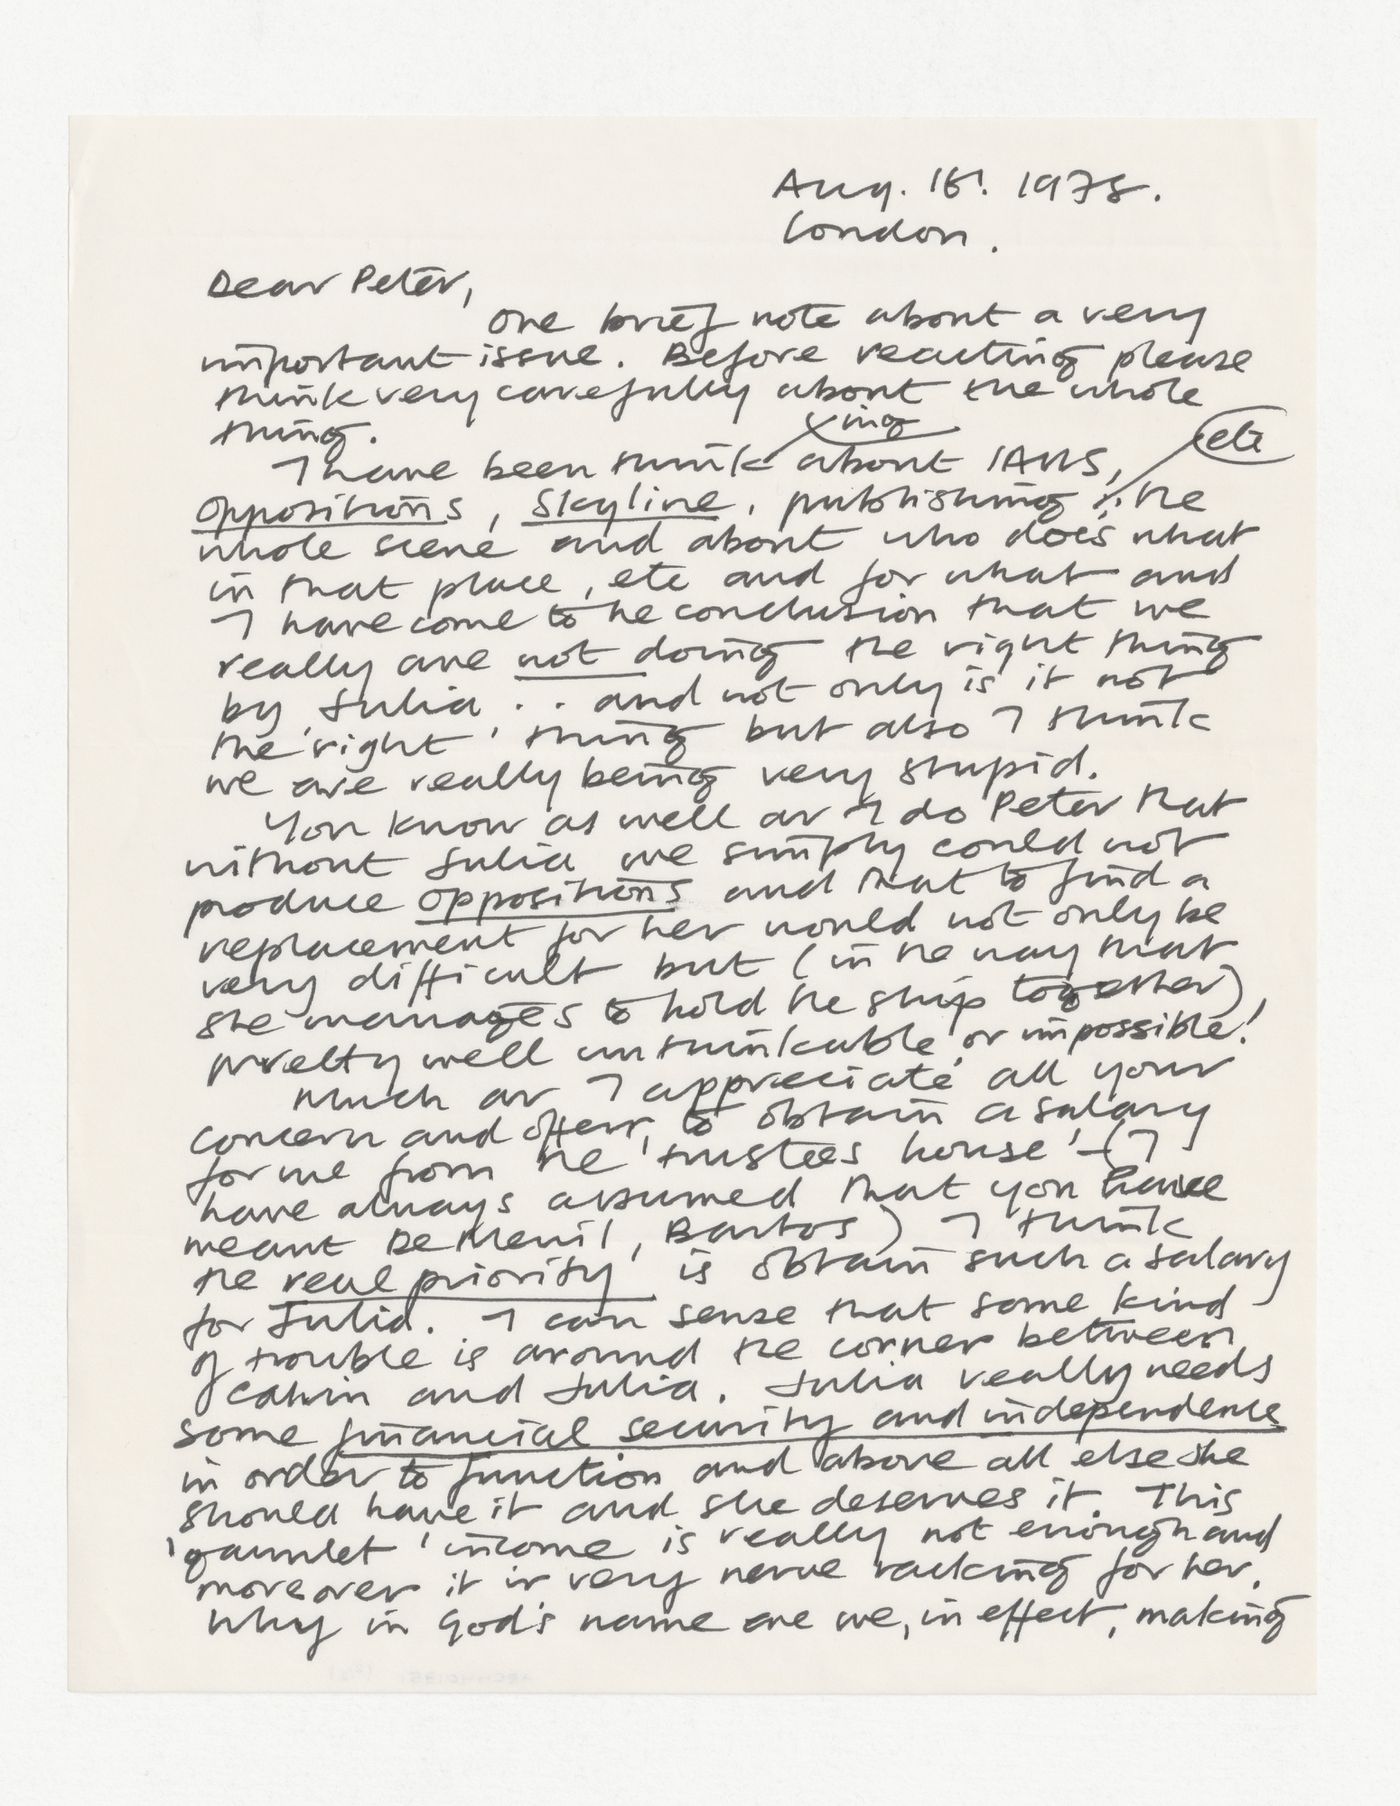 Letter from Kenneth Frampton to Peter D. Eisenman about Julia Bloomfield's role at IAUS